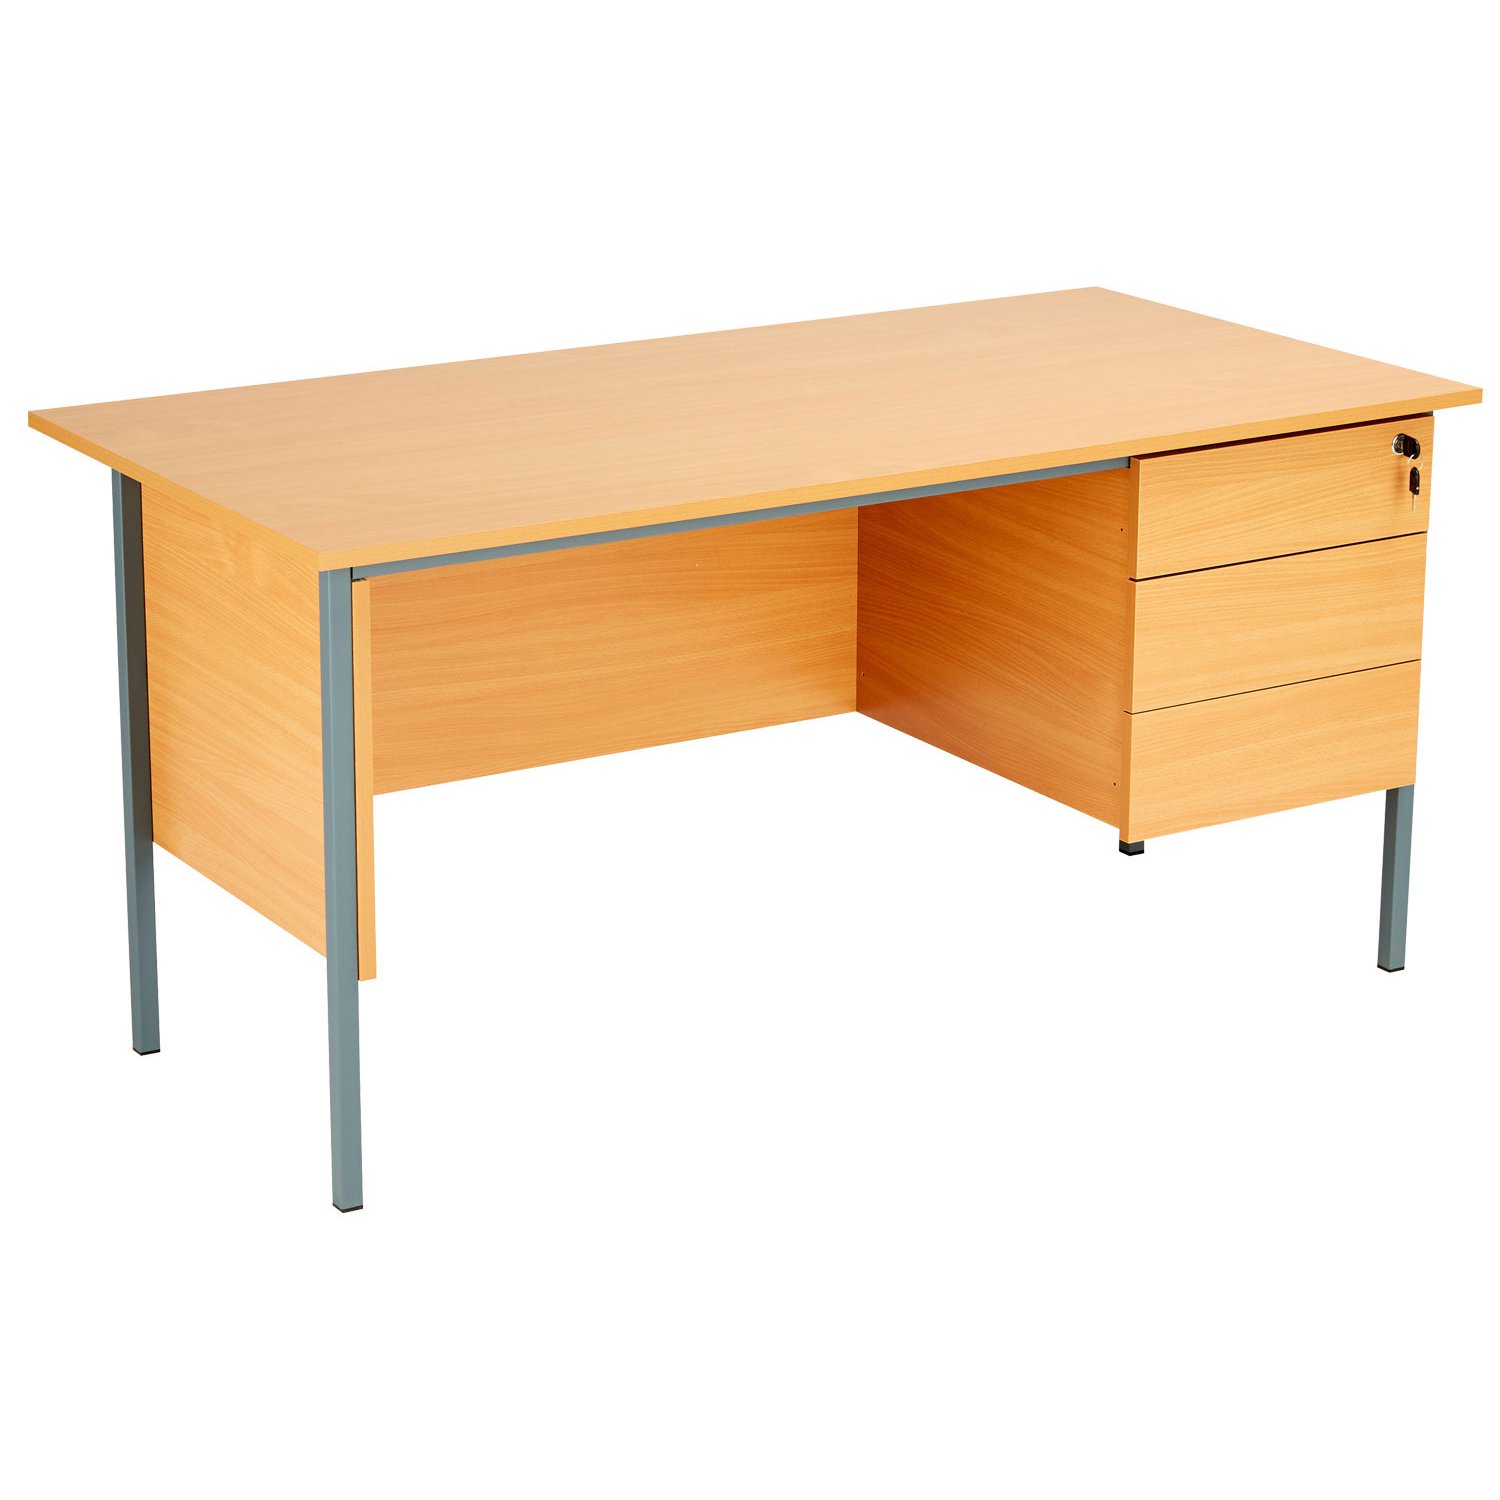 Primo Clerical Desk With 3 Drawers, Warm Beech